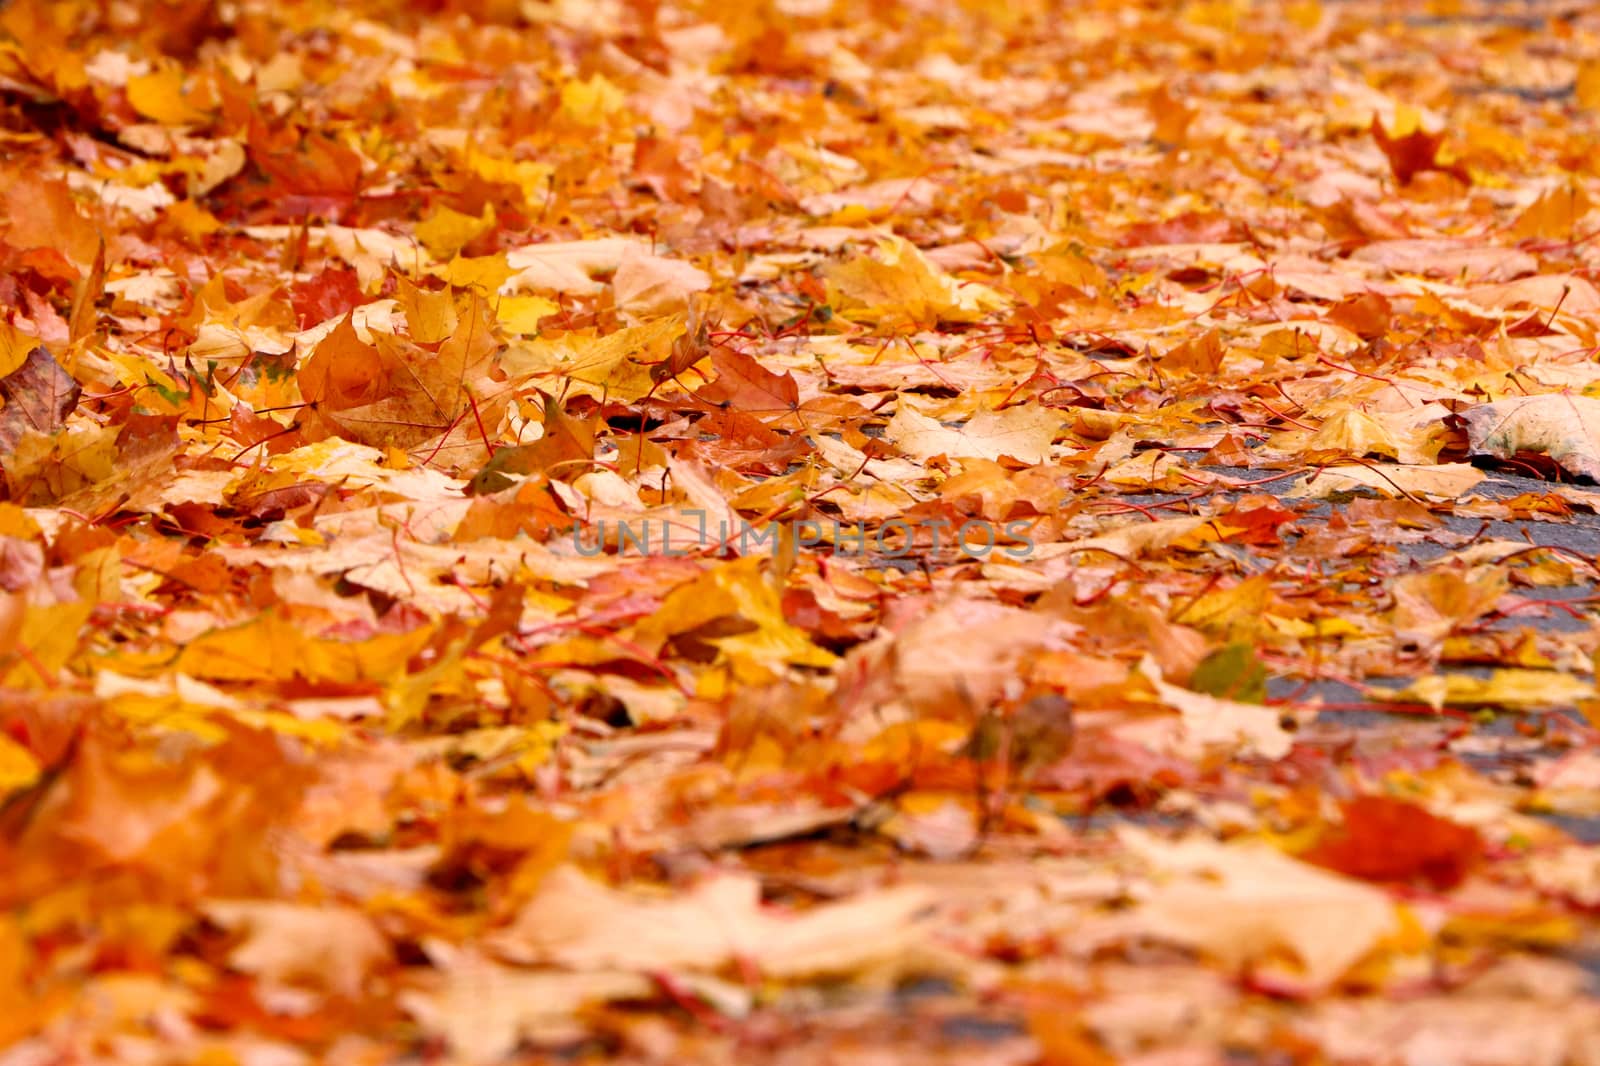 Autumn background from lot of colorful fallen yellow leaves on the ground outdoors, close up view